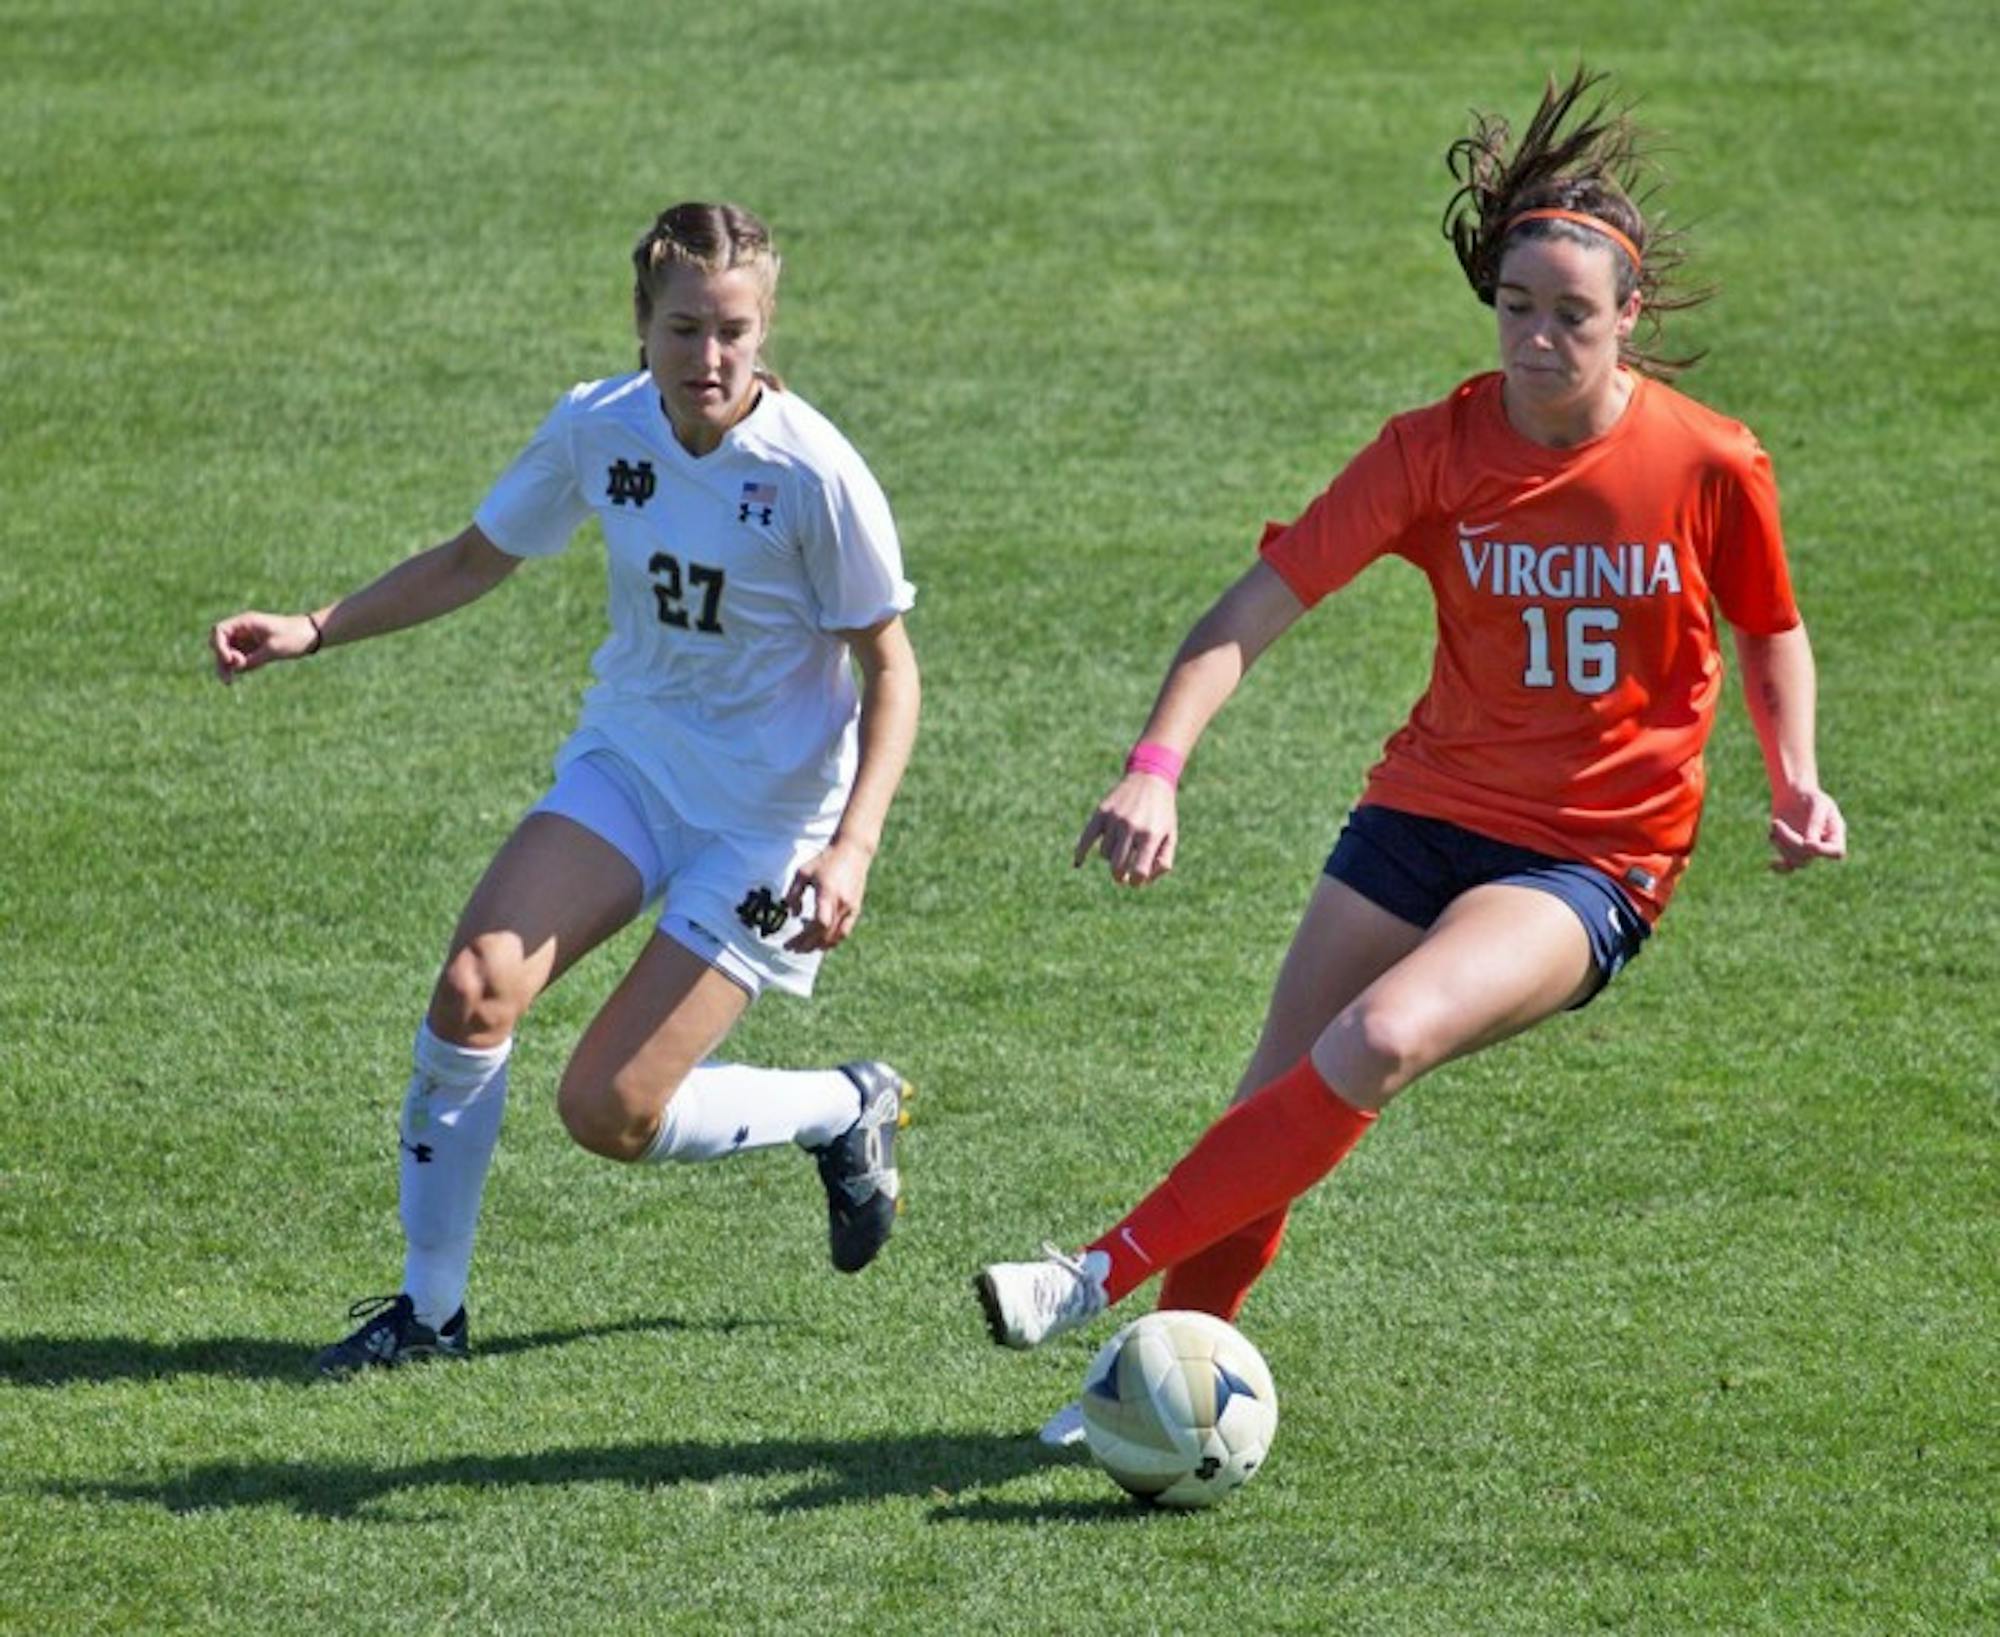 Irish senior forward Kaleigh Olmsted chases down Cavaliers freshman defender Phoebe McClernon during Notre Dame’s 1-0 loss against Virginia on Oct. 9 at Alumni Stadium.